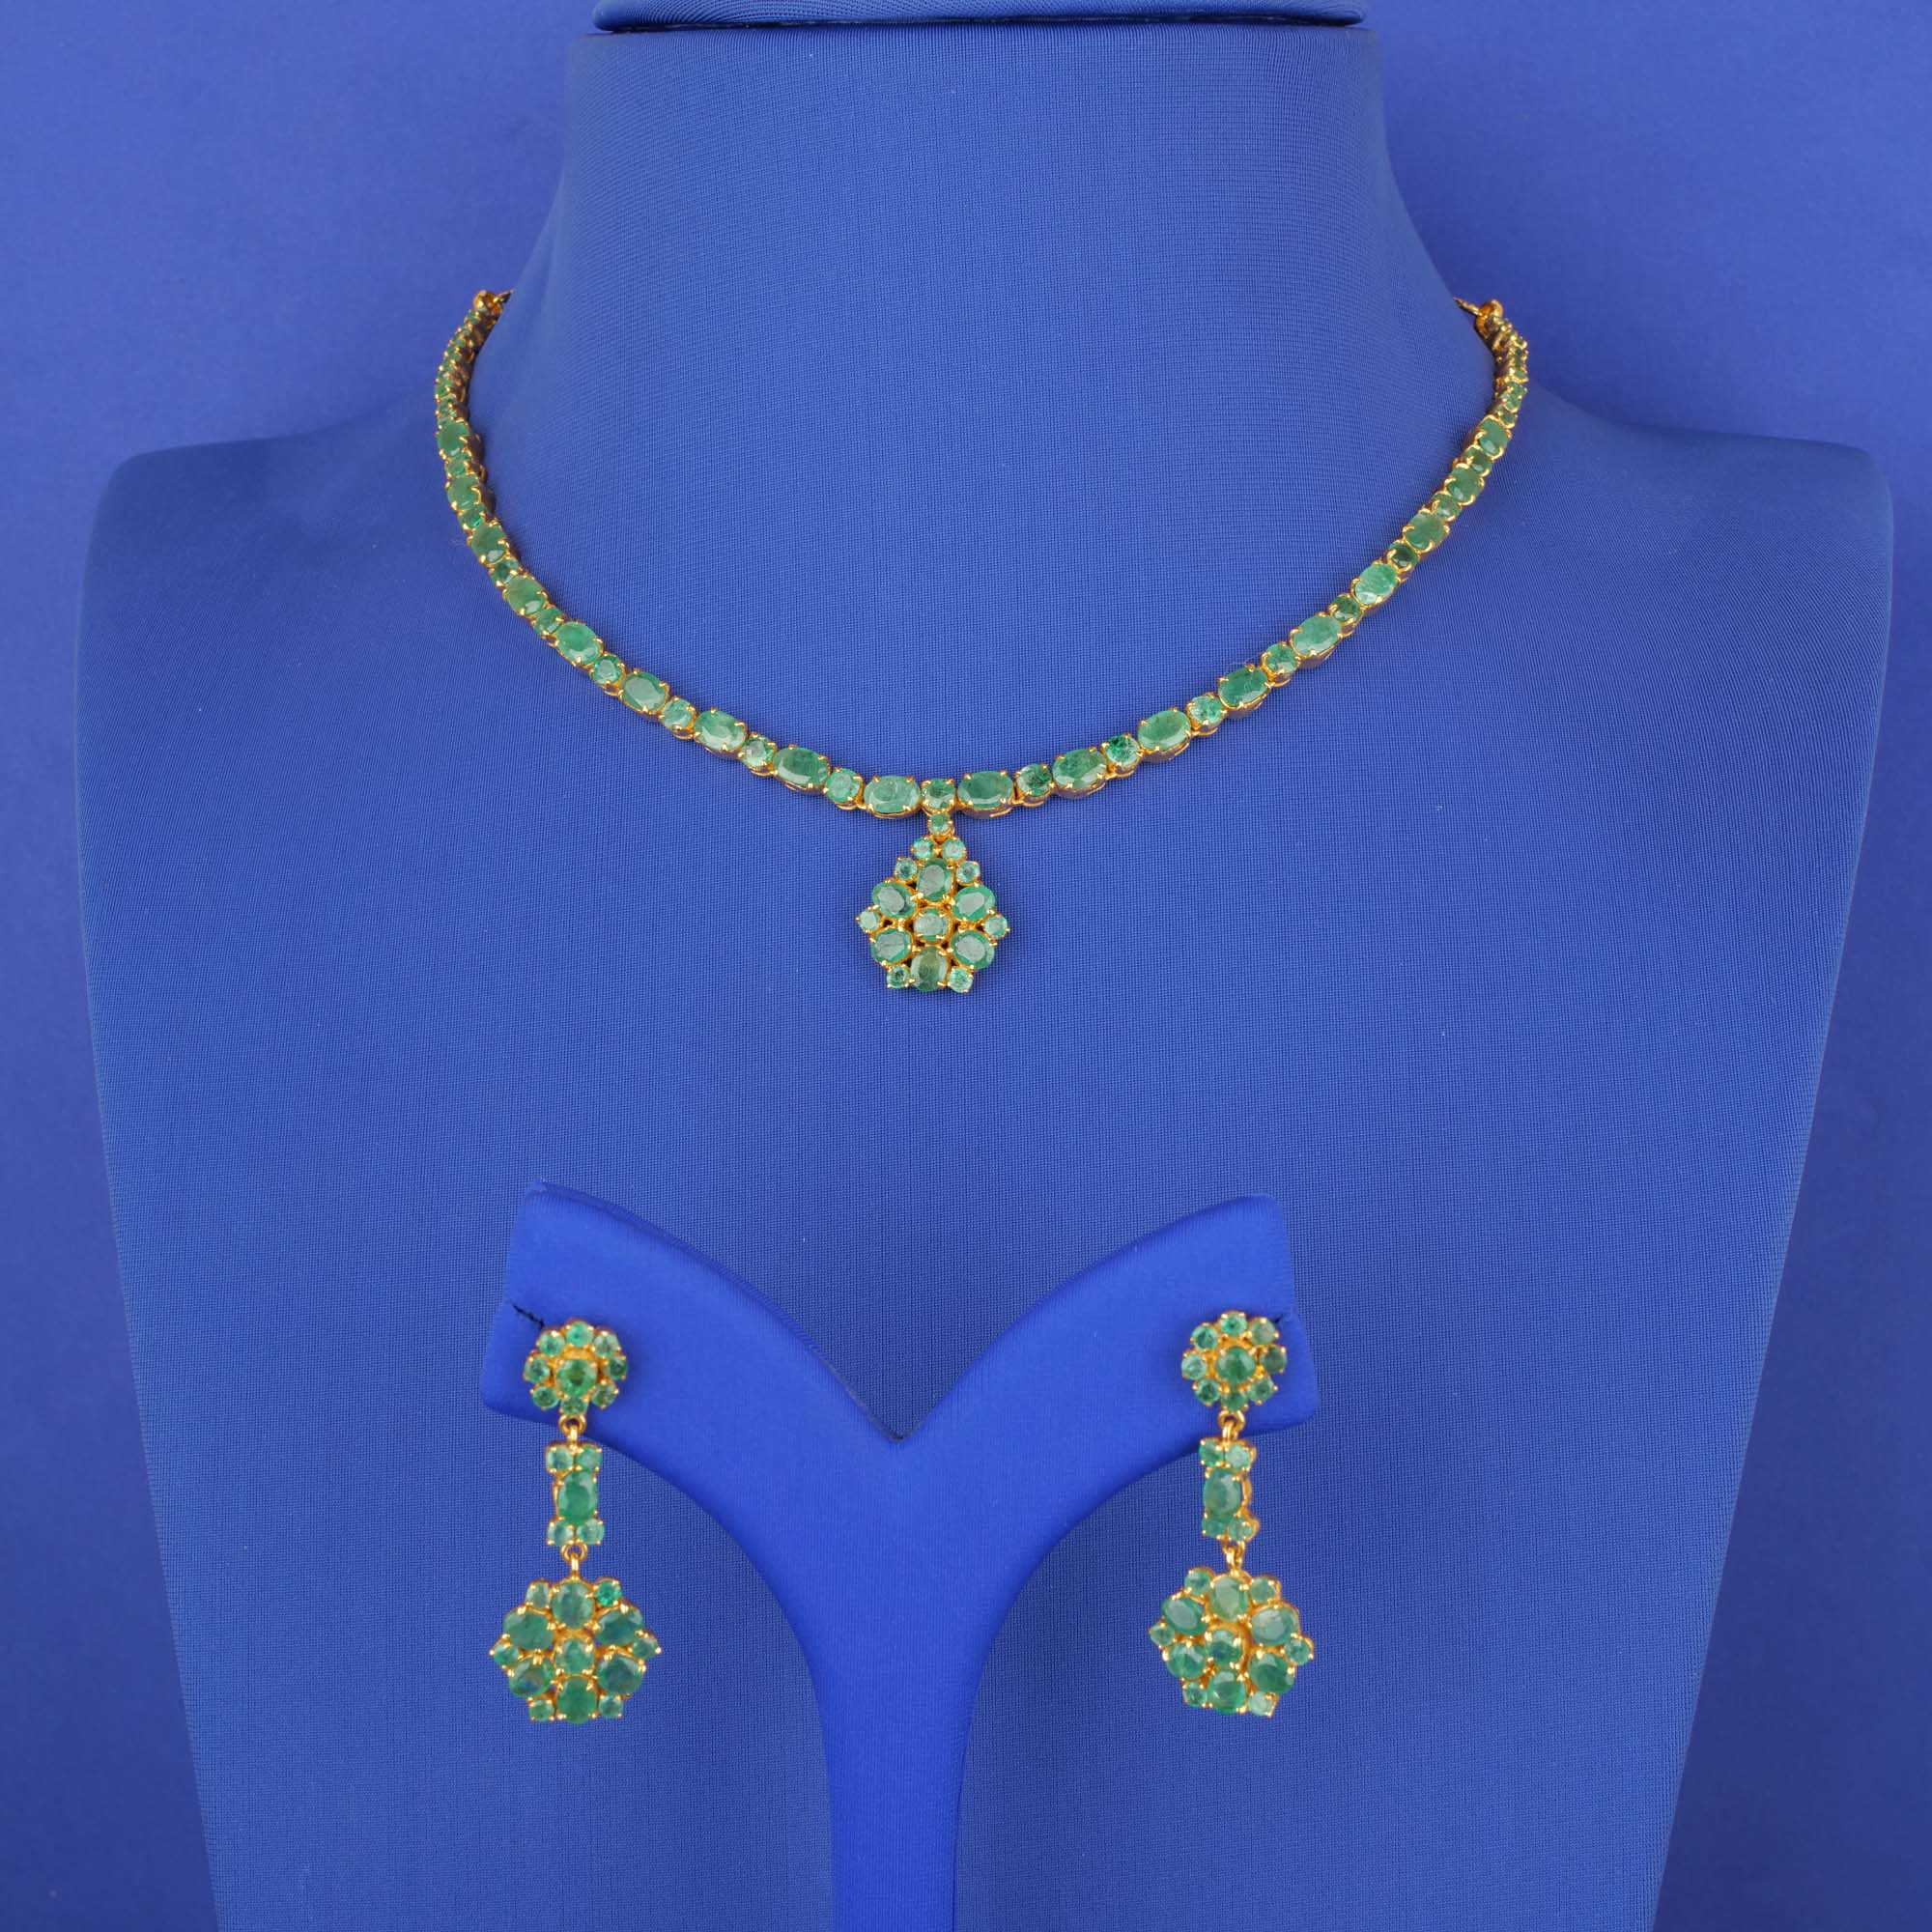 22K Gold Emerald Necklace and Earrings Set